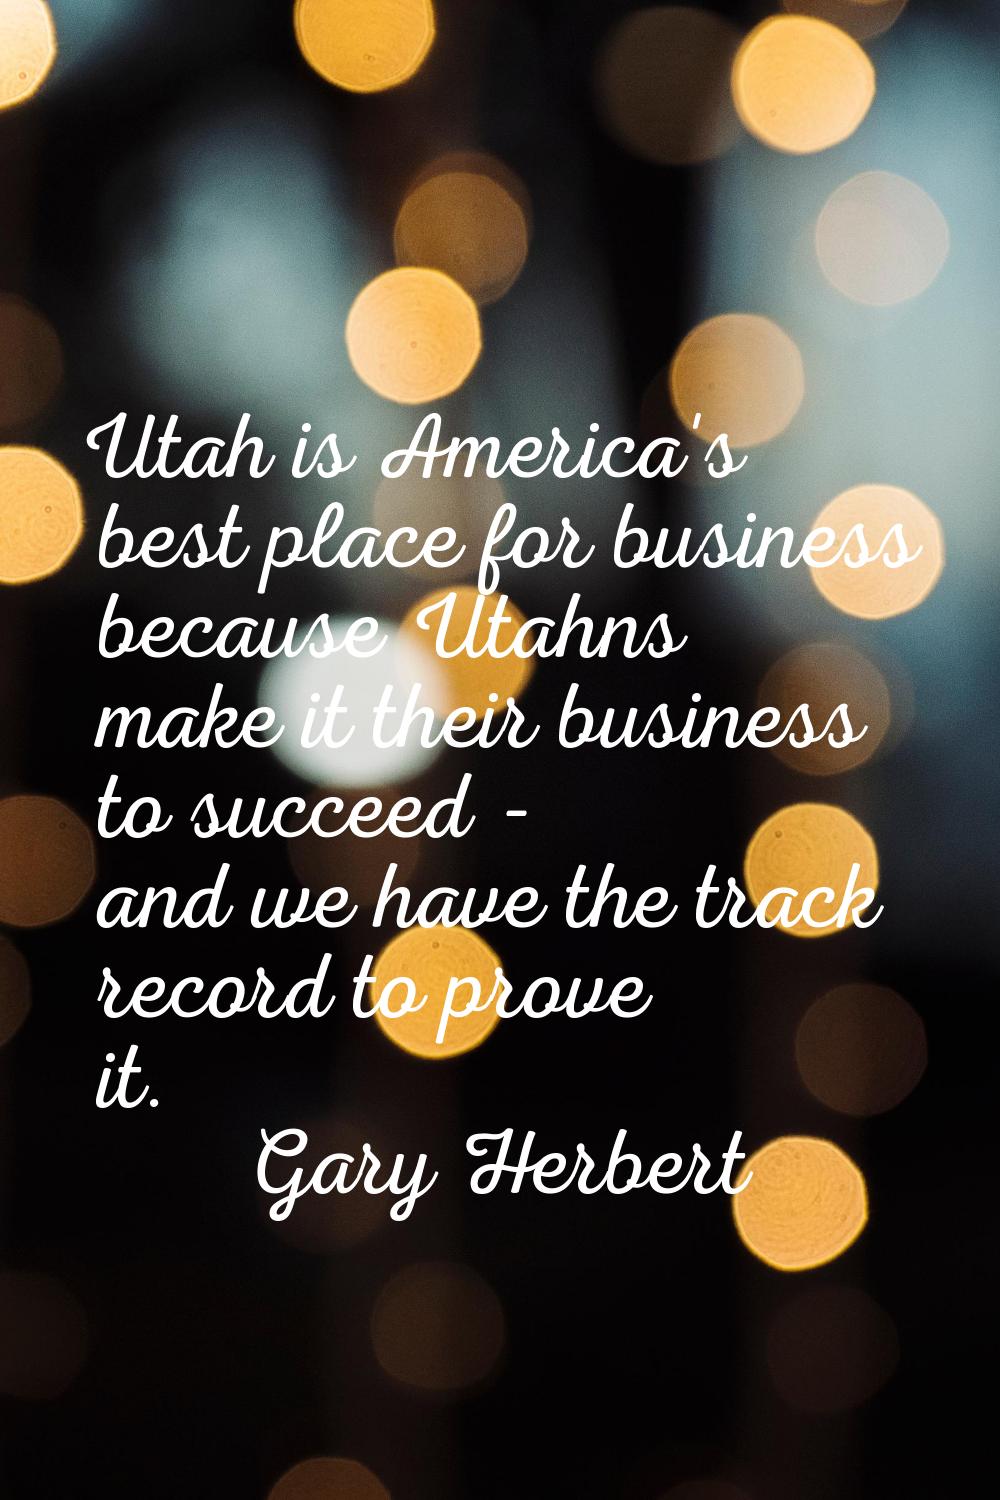 Utah is America's best place for business because Utahns make it their business to succeed - and we